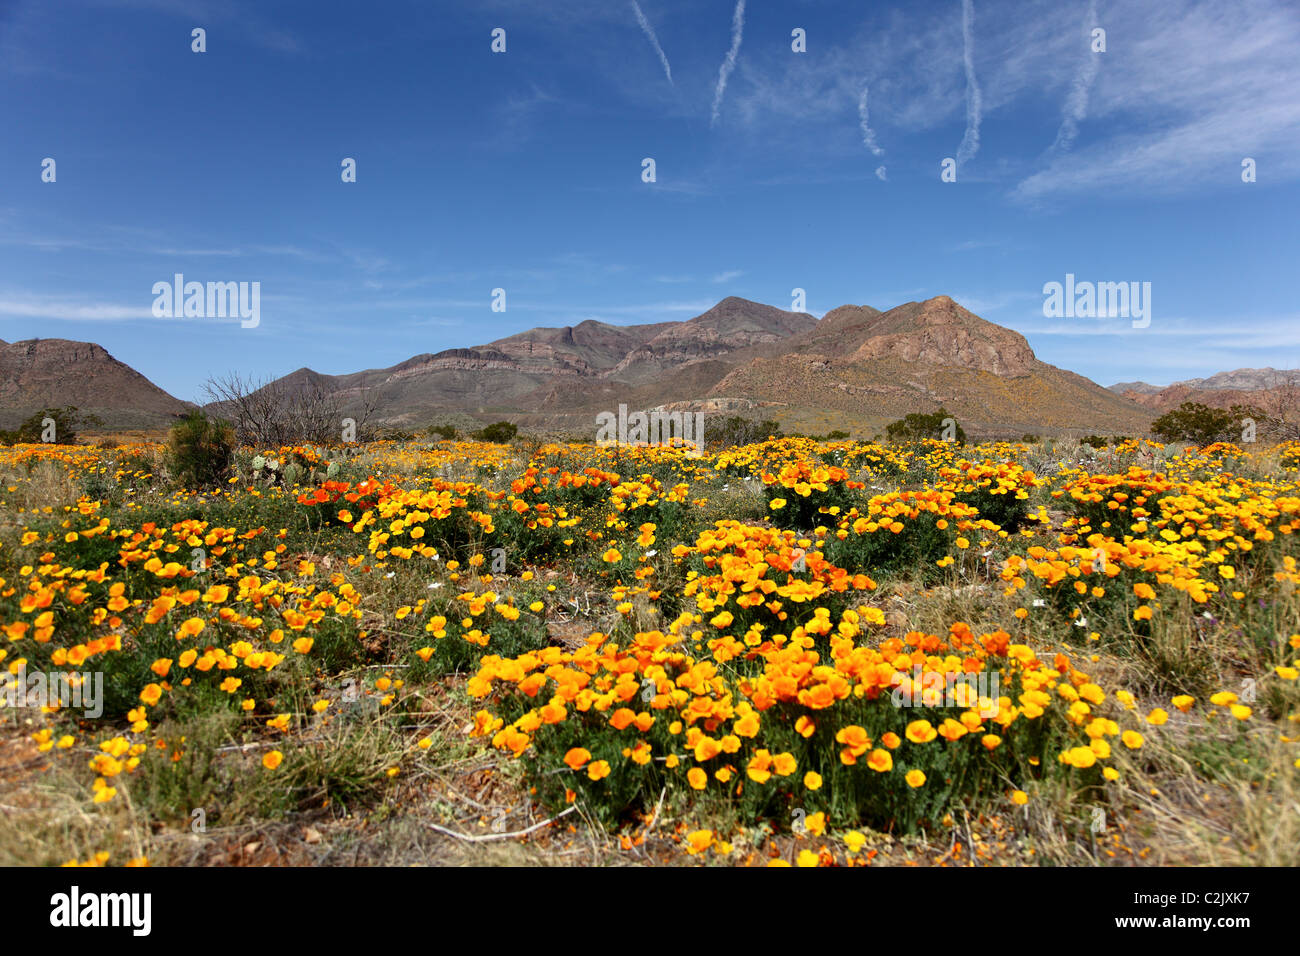 Yellow poppies in a desert field in front of the Franklin Mountains in El Paso, Texas, United States Stock Photo